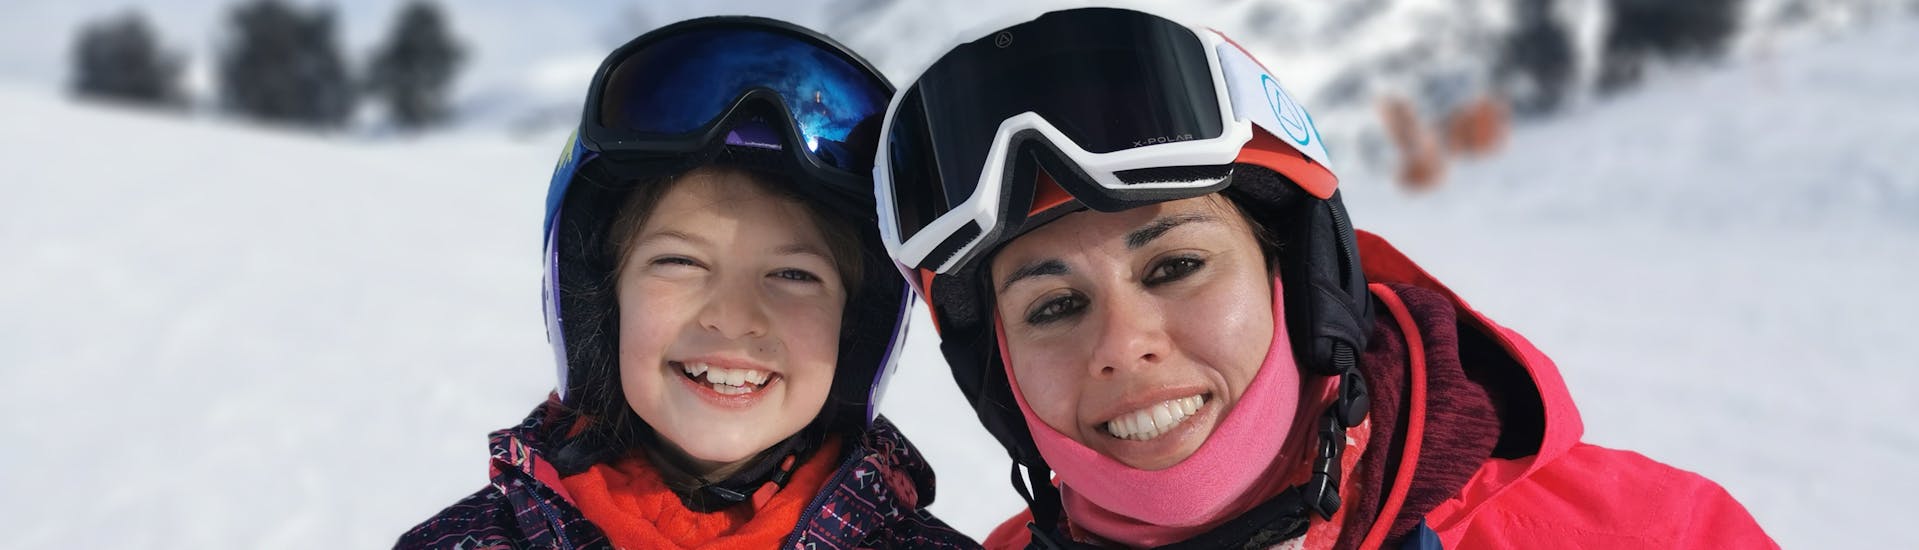 Snowboarding Lessons for Kids (4-16 y.) of All Levels - Half-day from Ski Life Escuela de Esquí Baqueira.